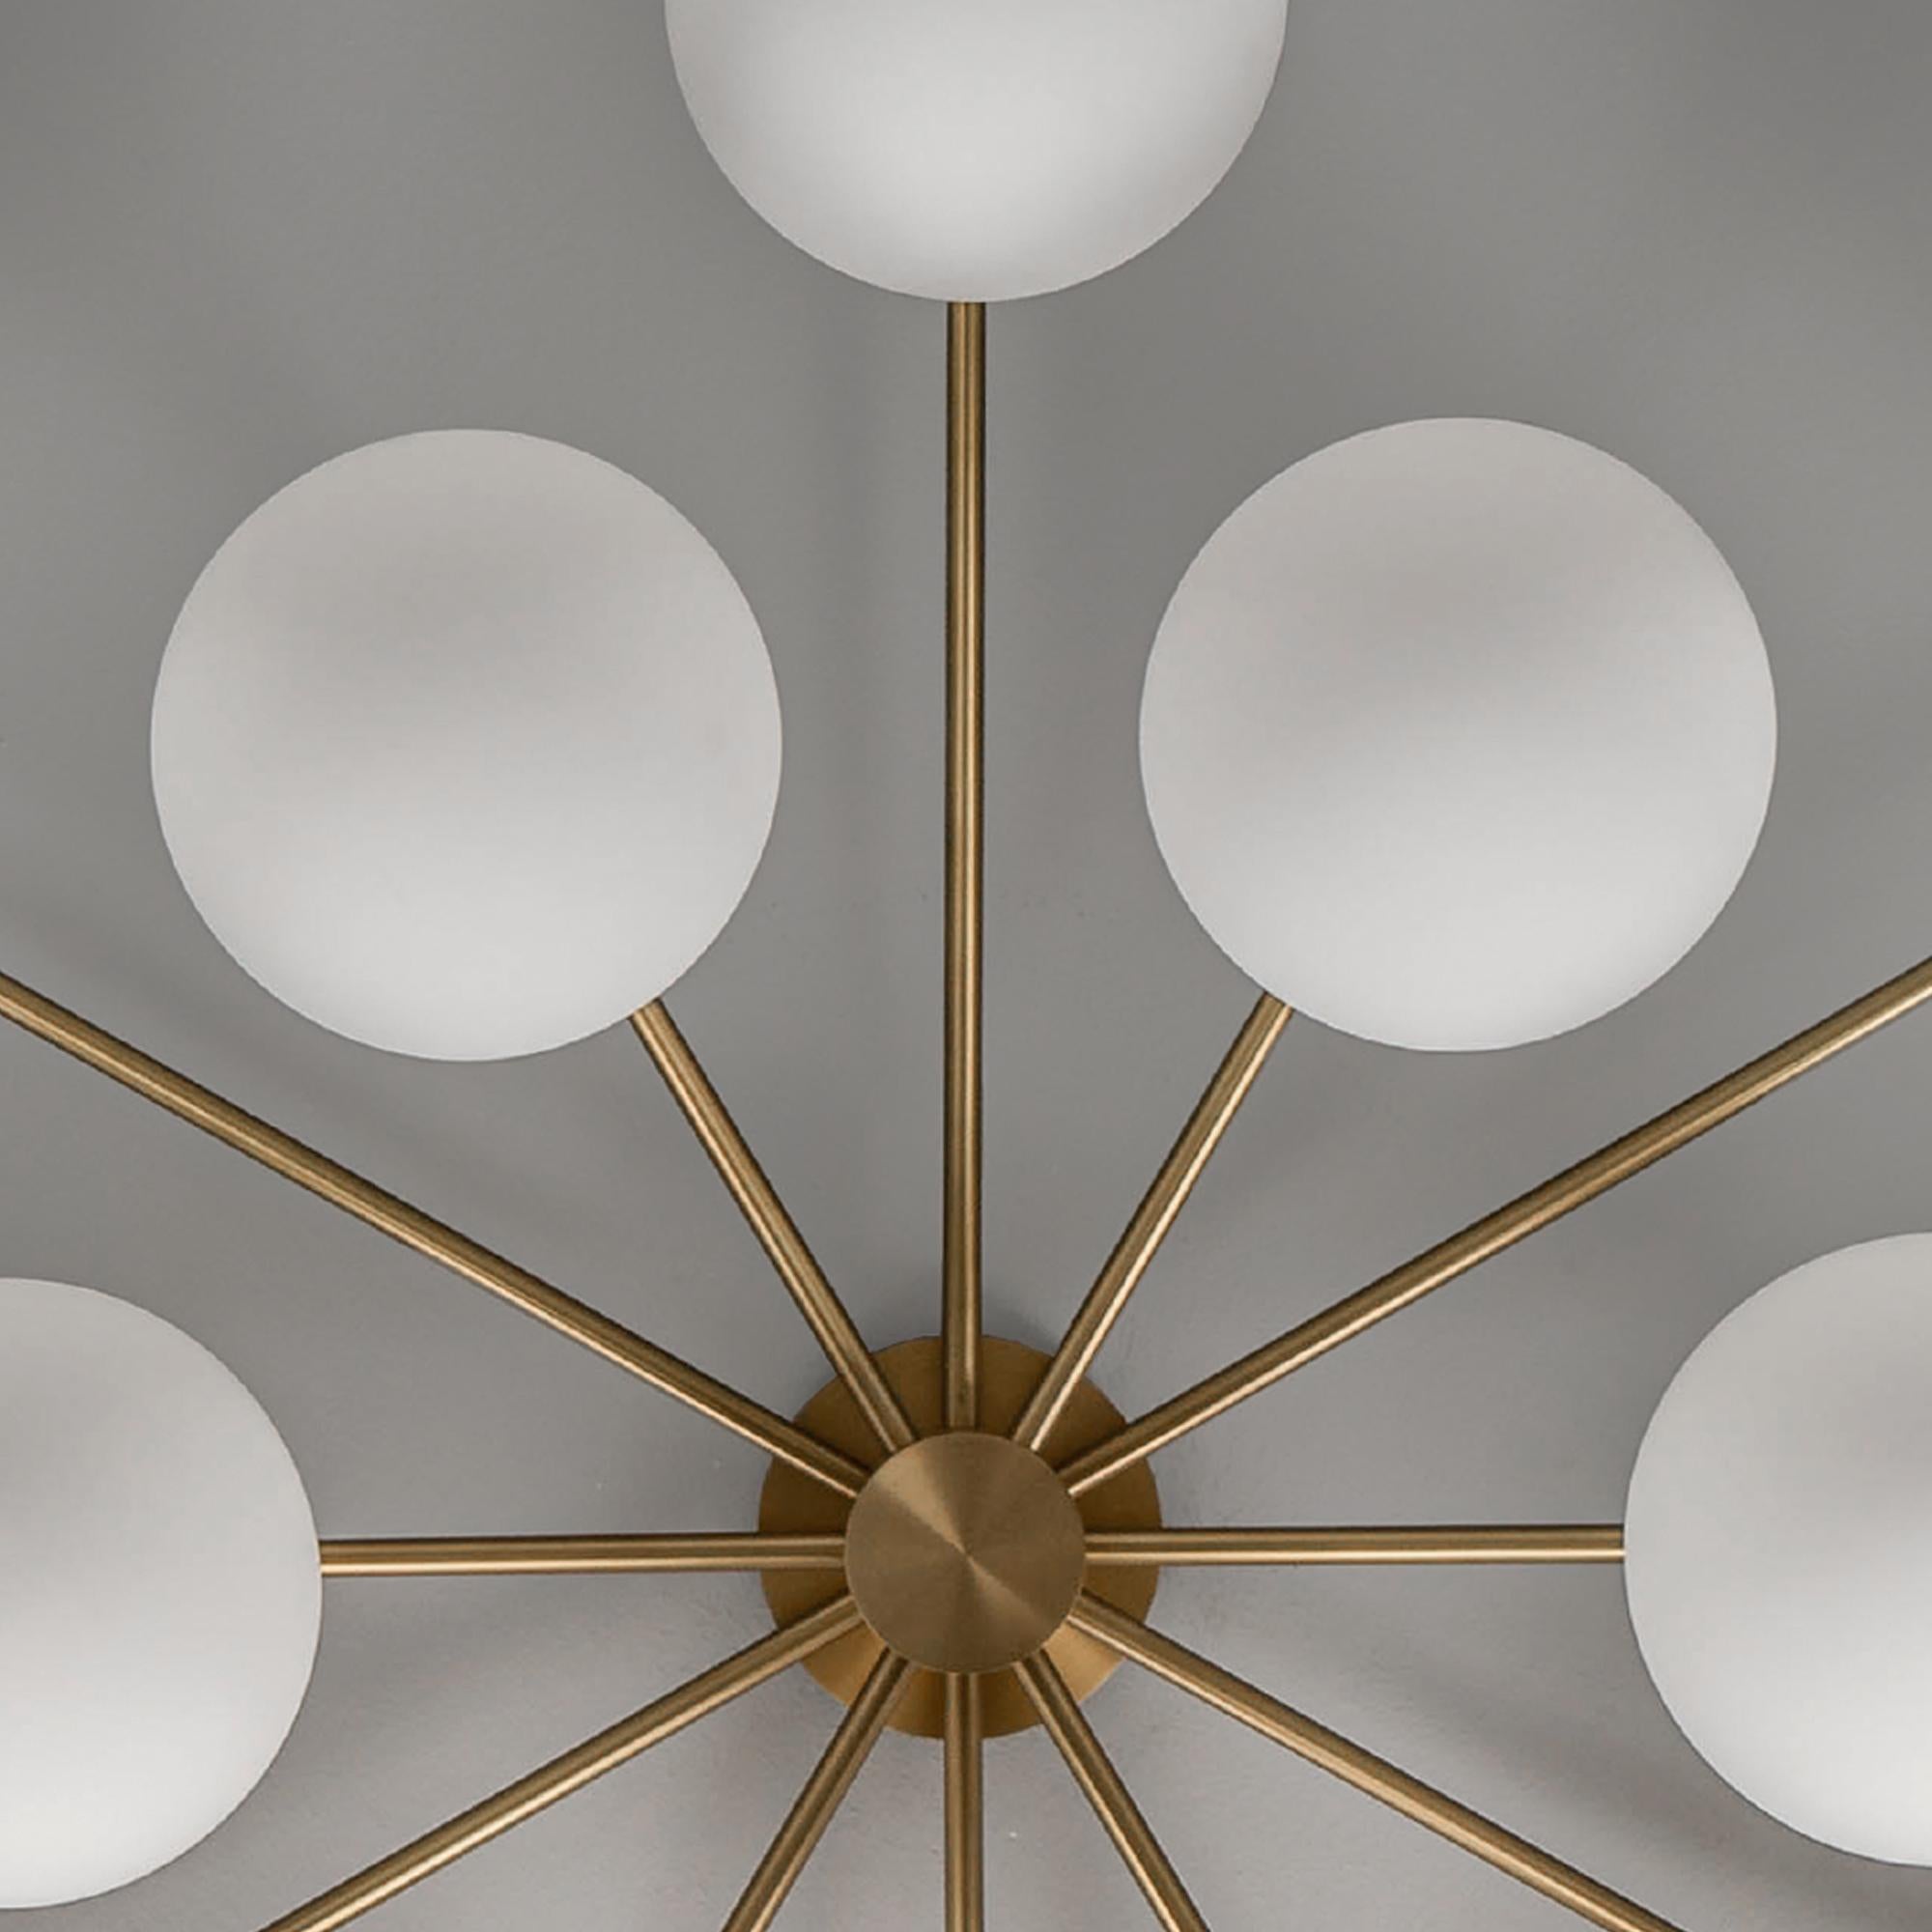 The crystalline clarity of the translucent sphere gifts a spontaneous, ethereal quality, aided by unassuming brass ceiling fixtures.

Available in our three signature finishes: Lacquered Burnished Brass (LBB); Black Gunmetal (BGM); Polished Nickel